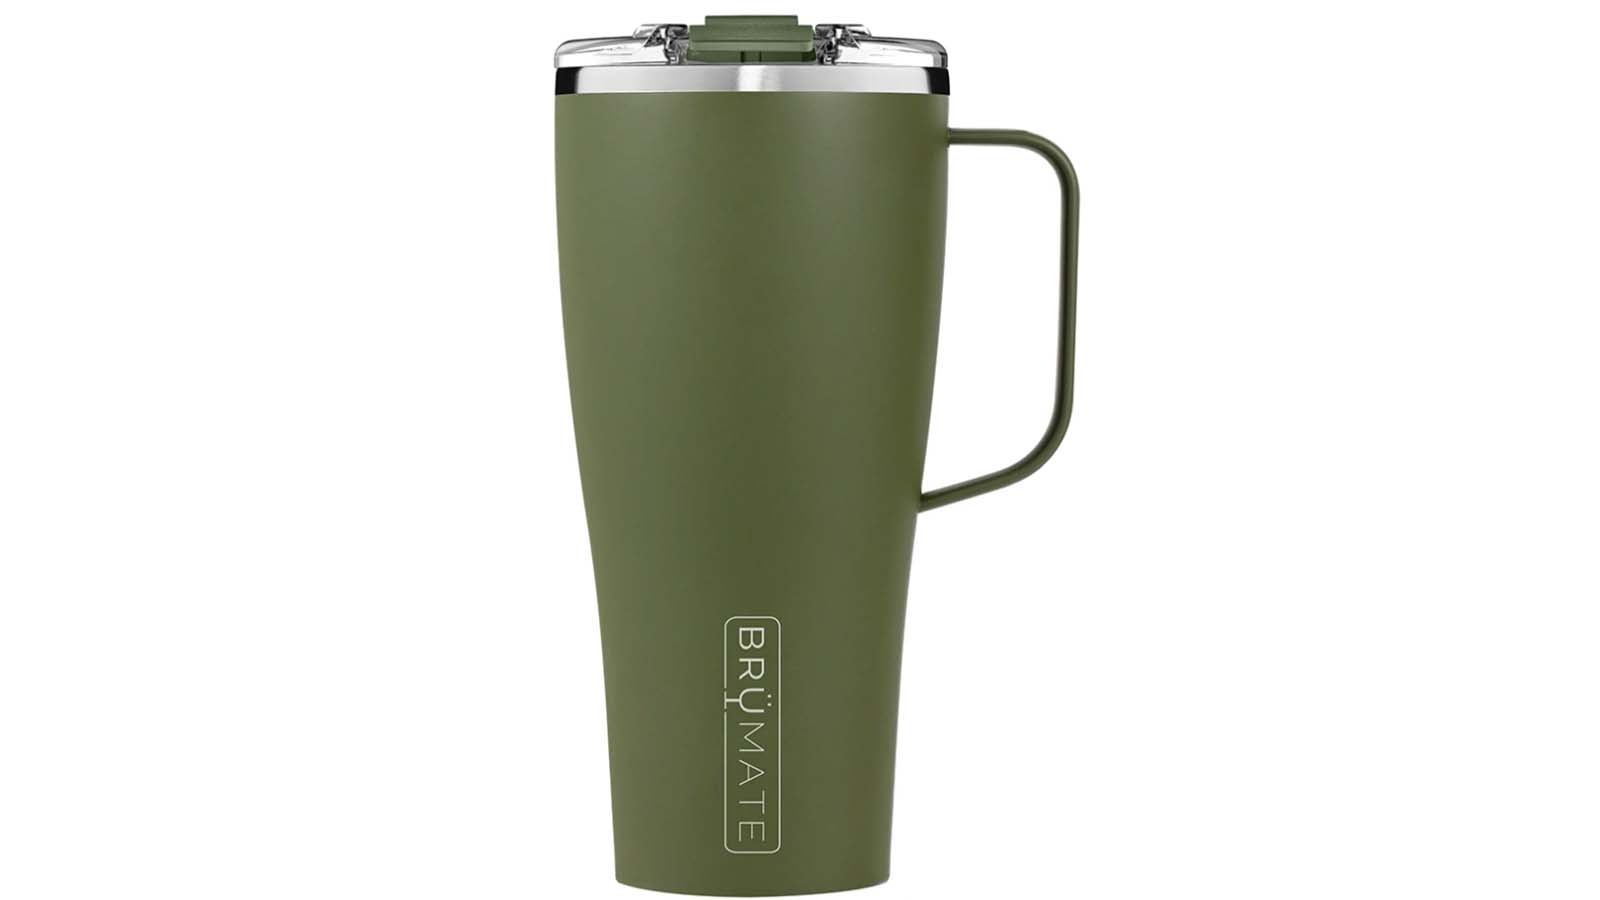 20 Best Travel Mugs and Coffee Cups of 2023